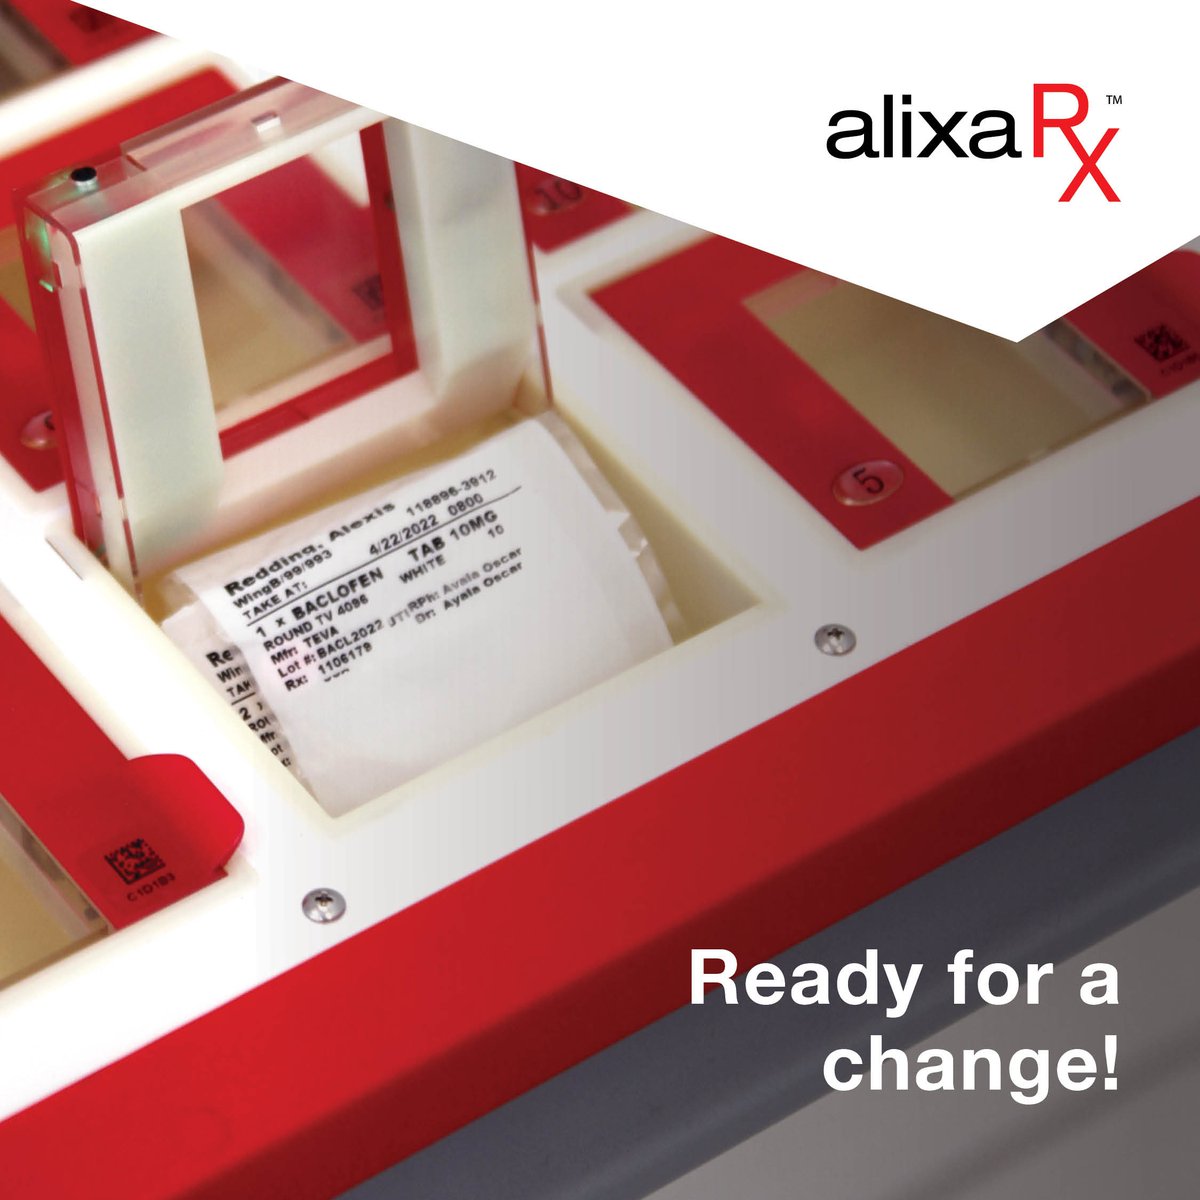 Looking for a pharmacy solution that's modern and efficient? Upgrade your medication management with AlixaRx.

Contact us today. alixarx.com/contact-us/

#AlixaRx #LTCpharmacy #PharmacyServices #LongTermCare #PharmacySolution